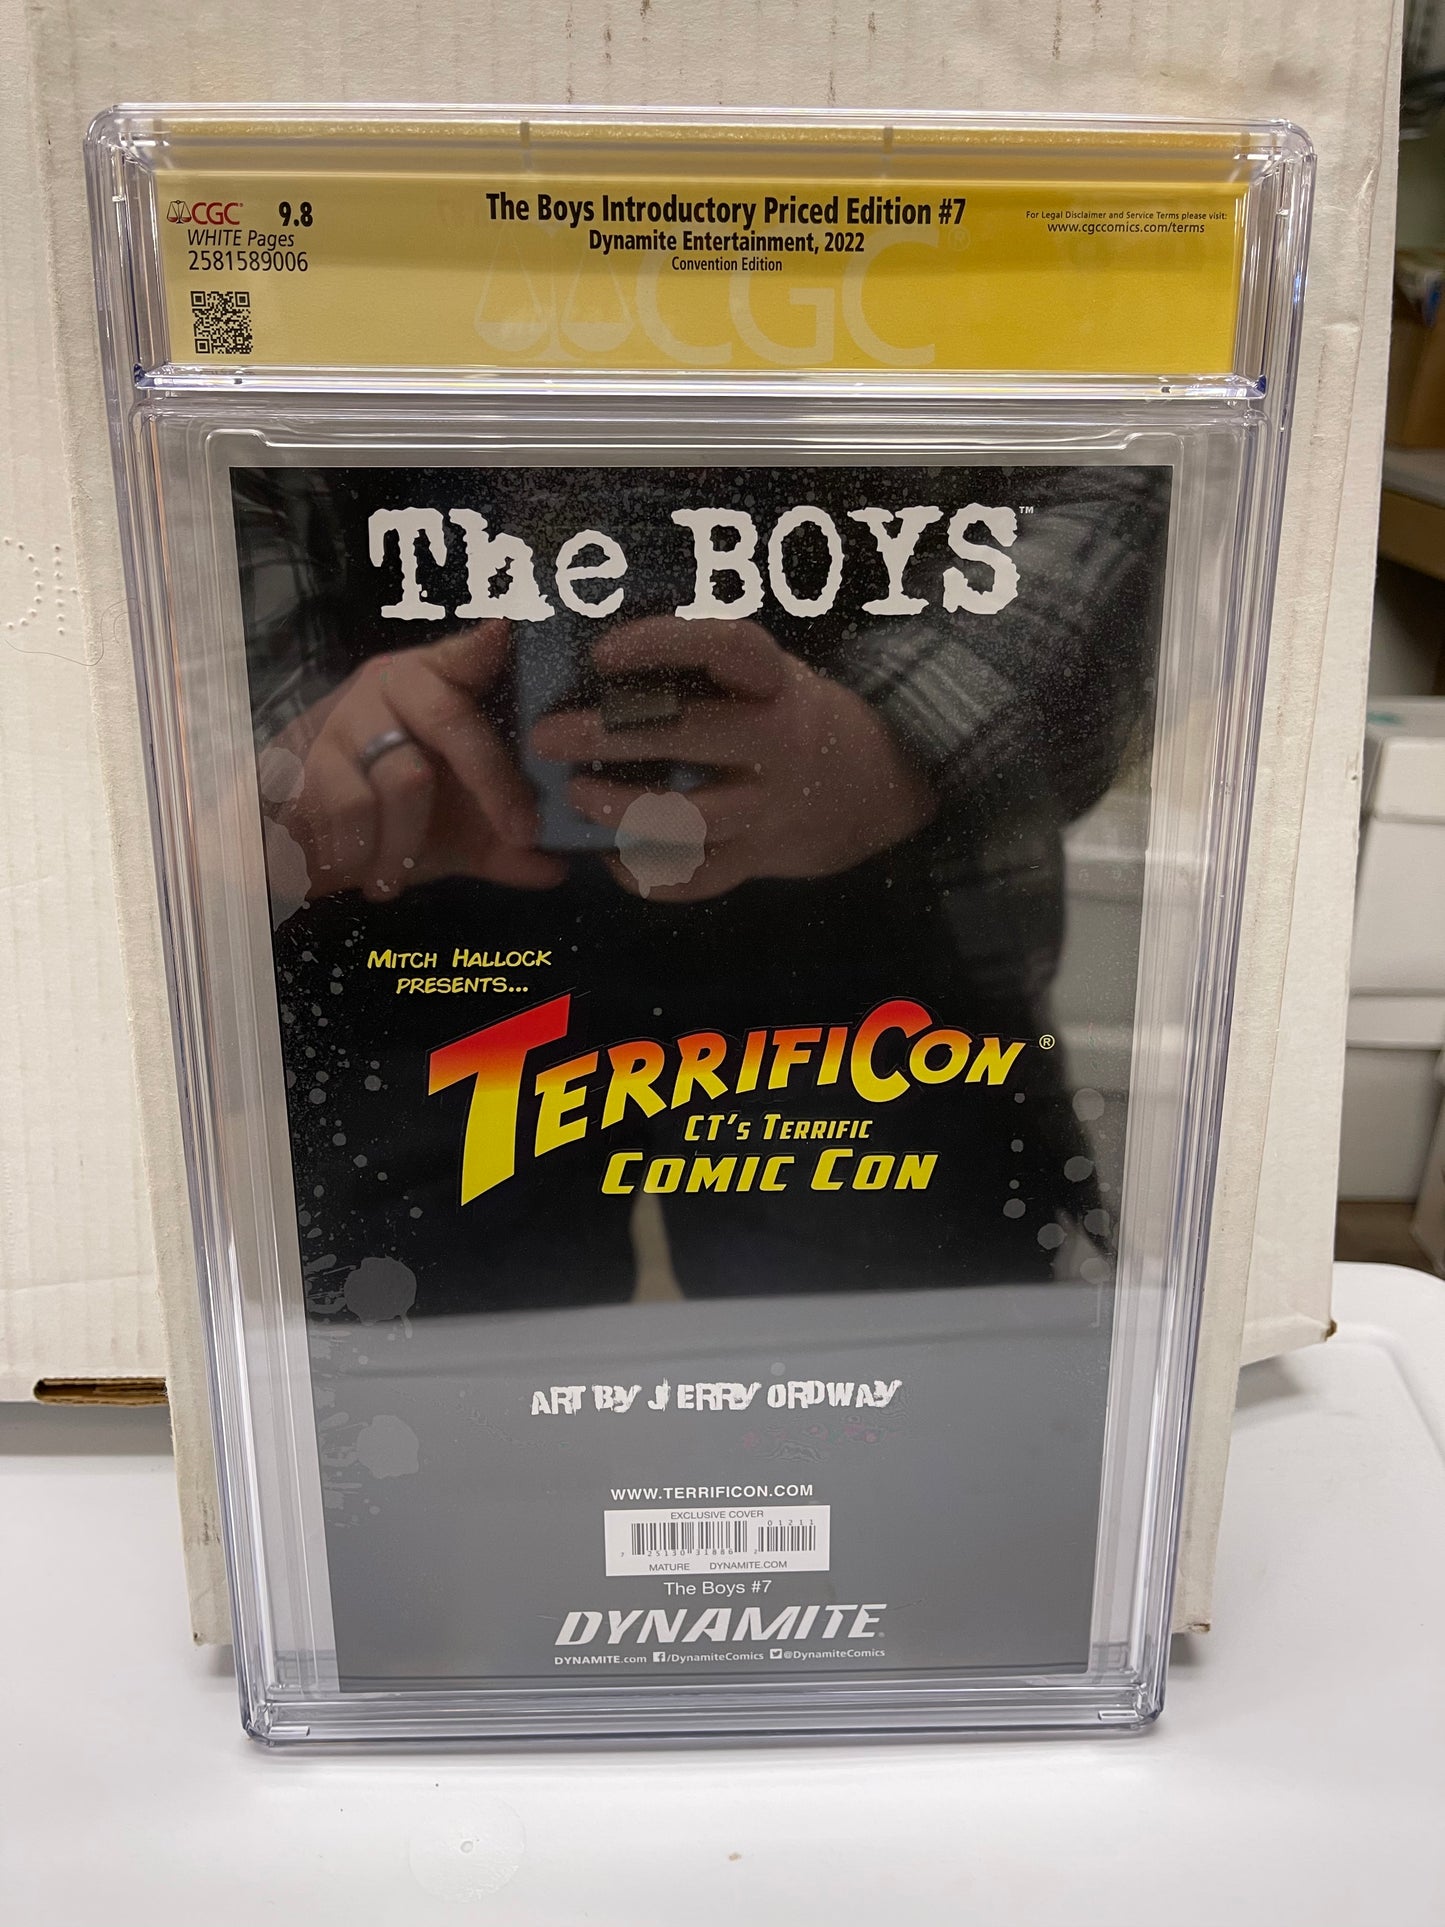 The Boys Indrotuctory Priced Edition #7 Terrificon Exclusive Variant CGC Signature Series